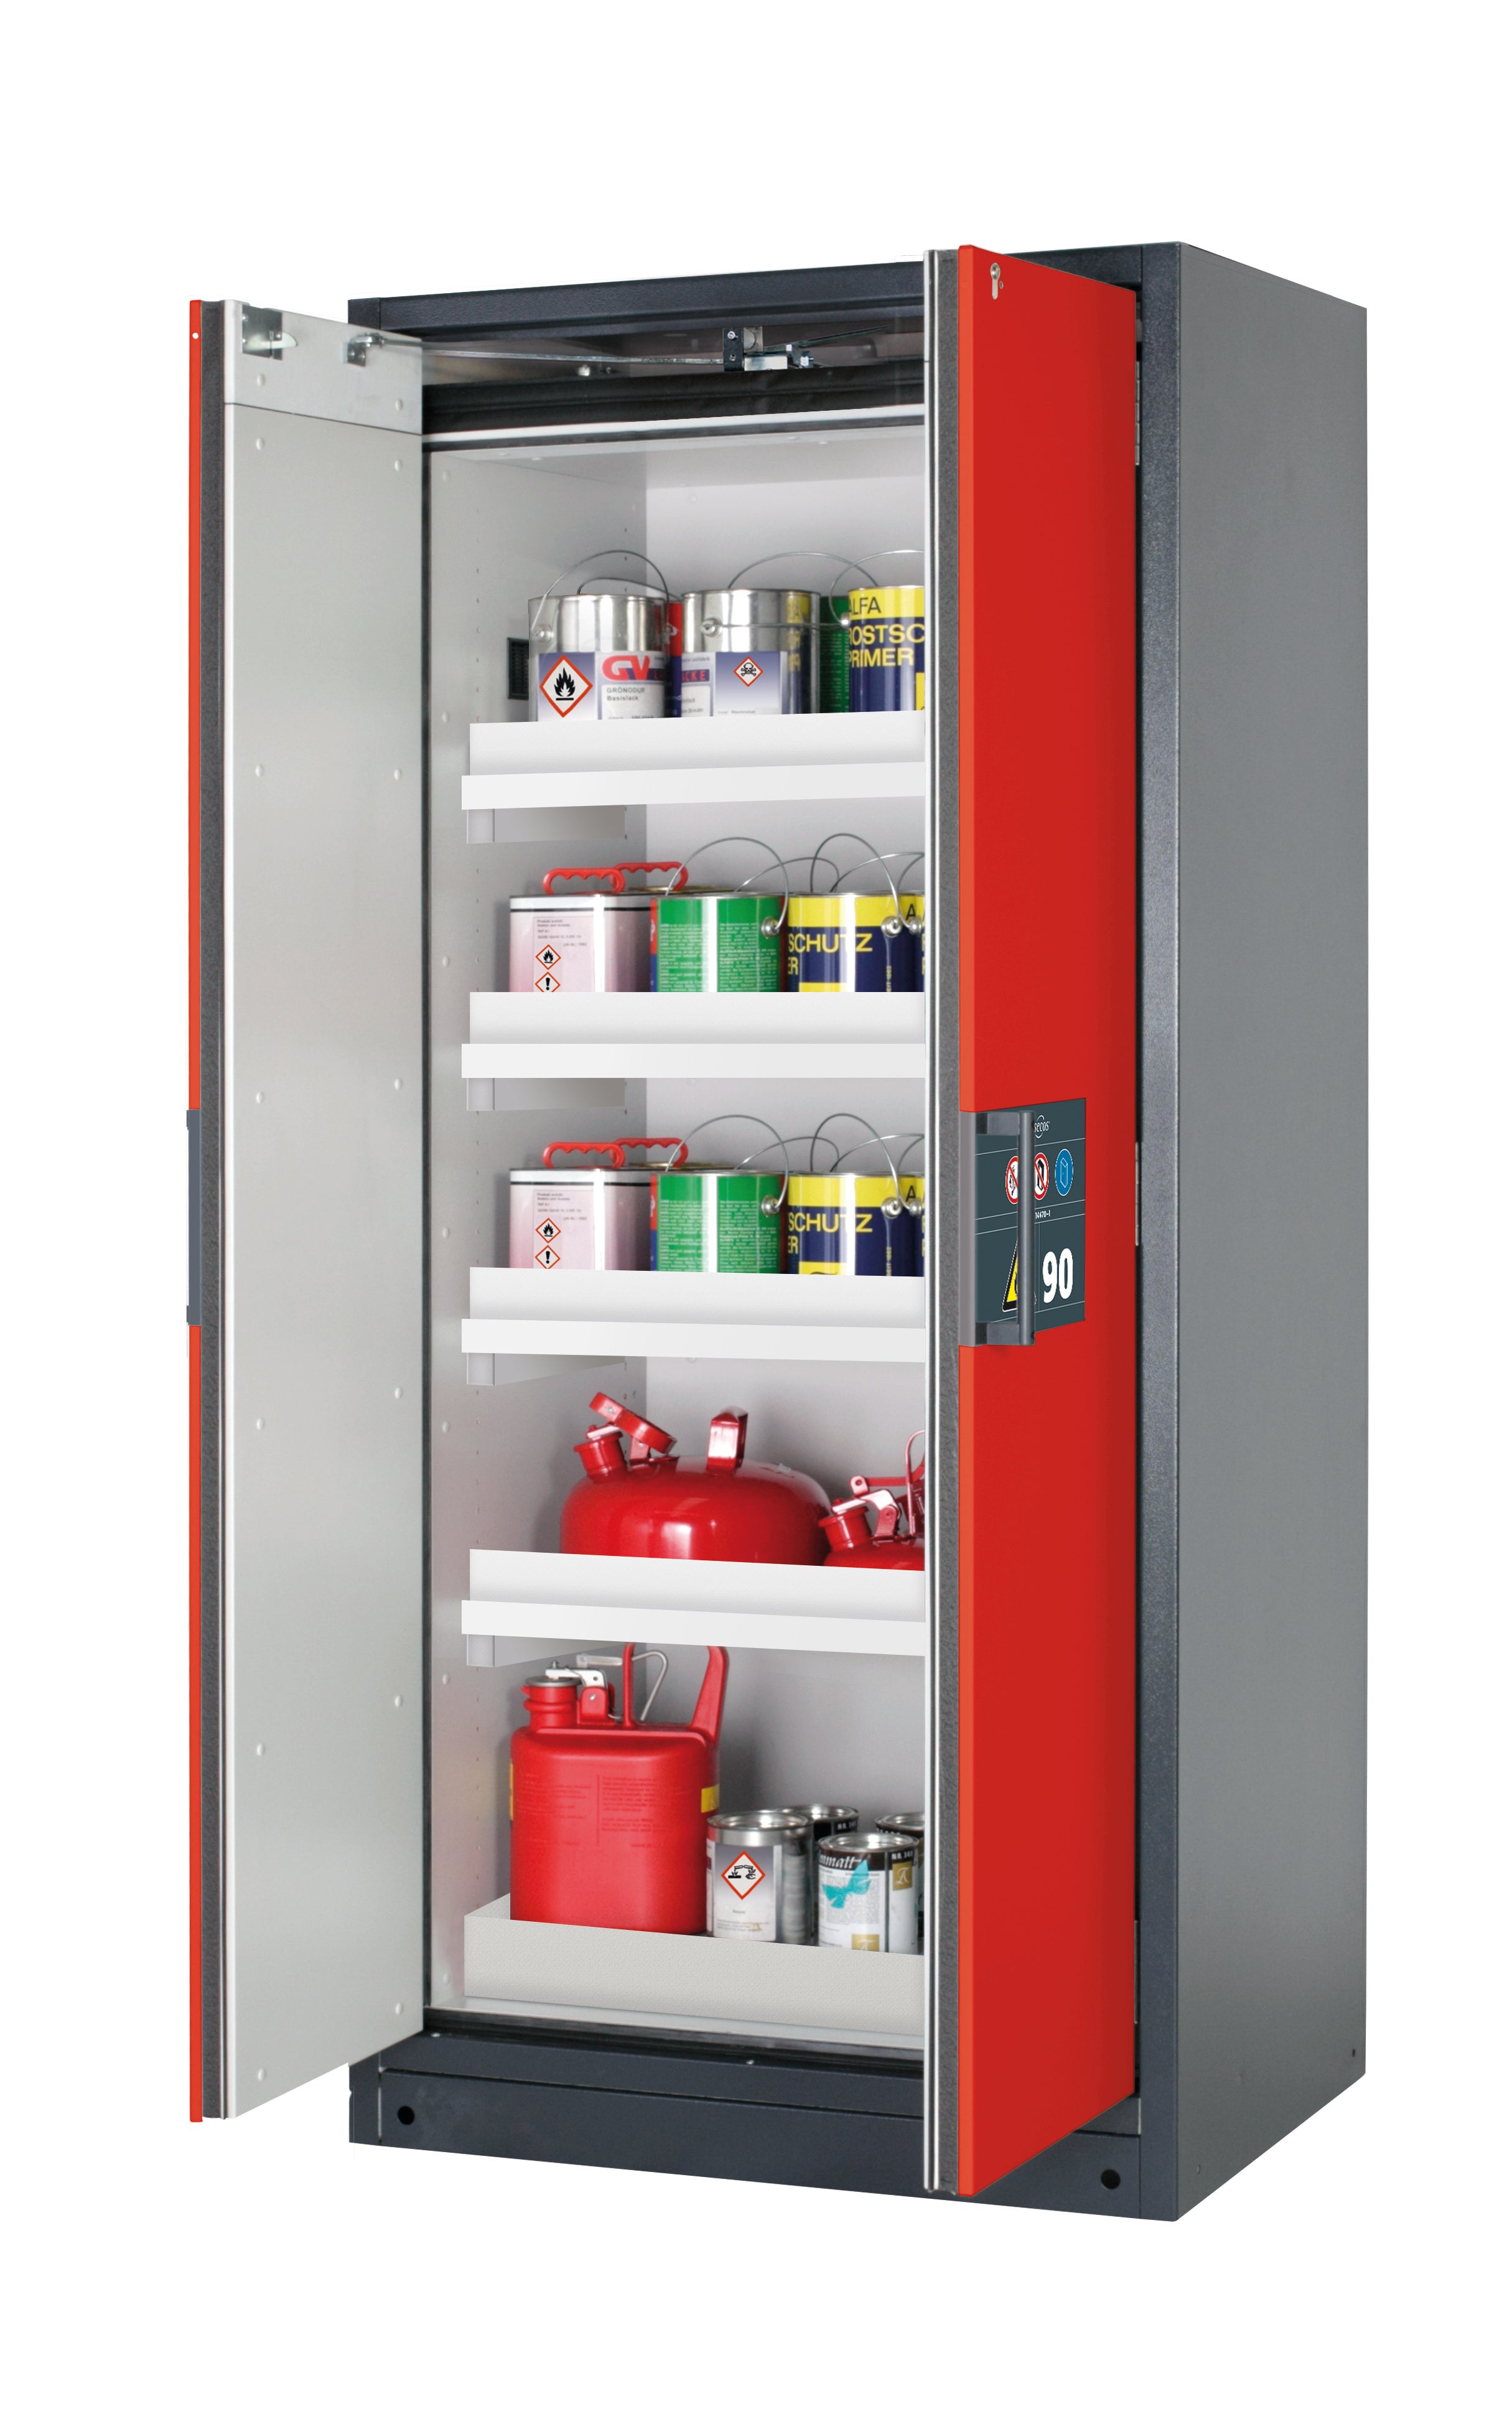 Type 90 safety storage cabinet Q-PEGASUS-90 model Q90.195.090.WDAC in traffic red RAL 3020 with 4x tray shelf (standard) (polypropylene),